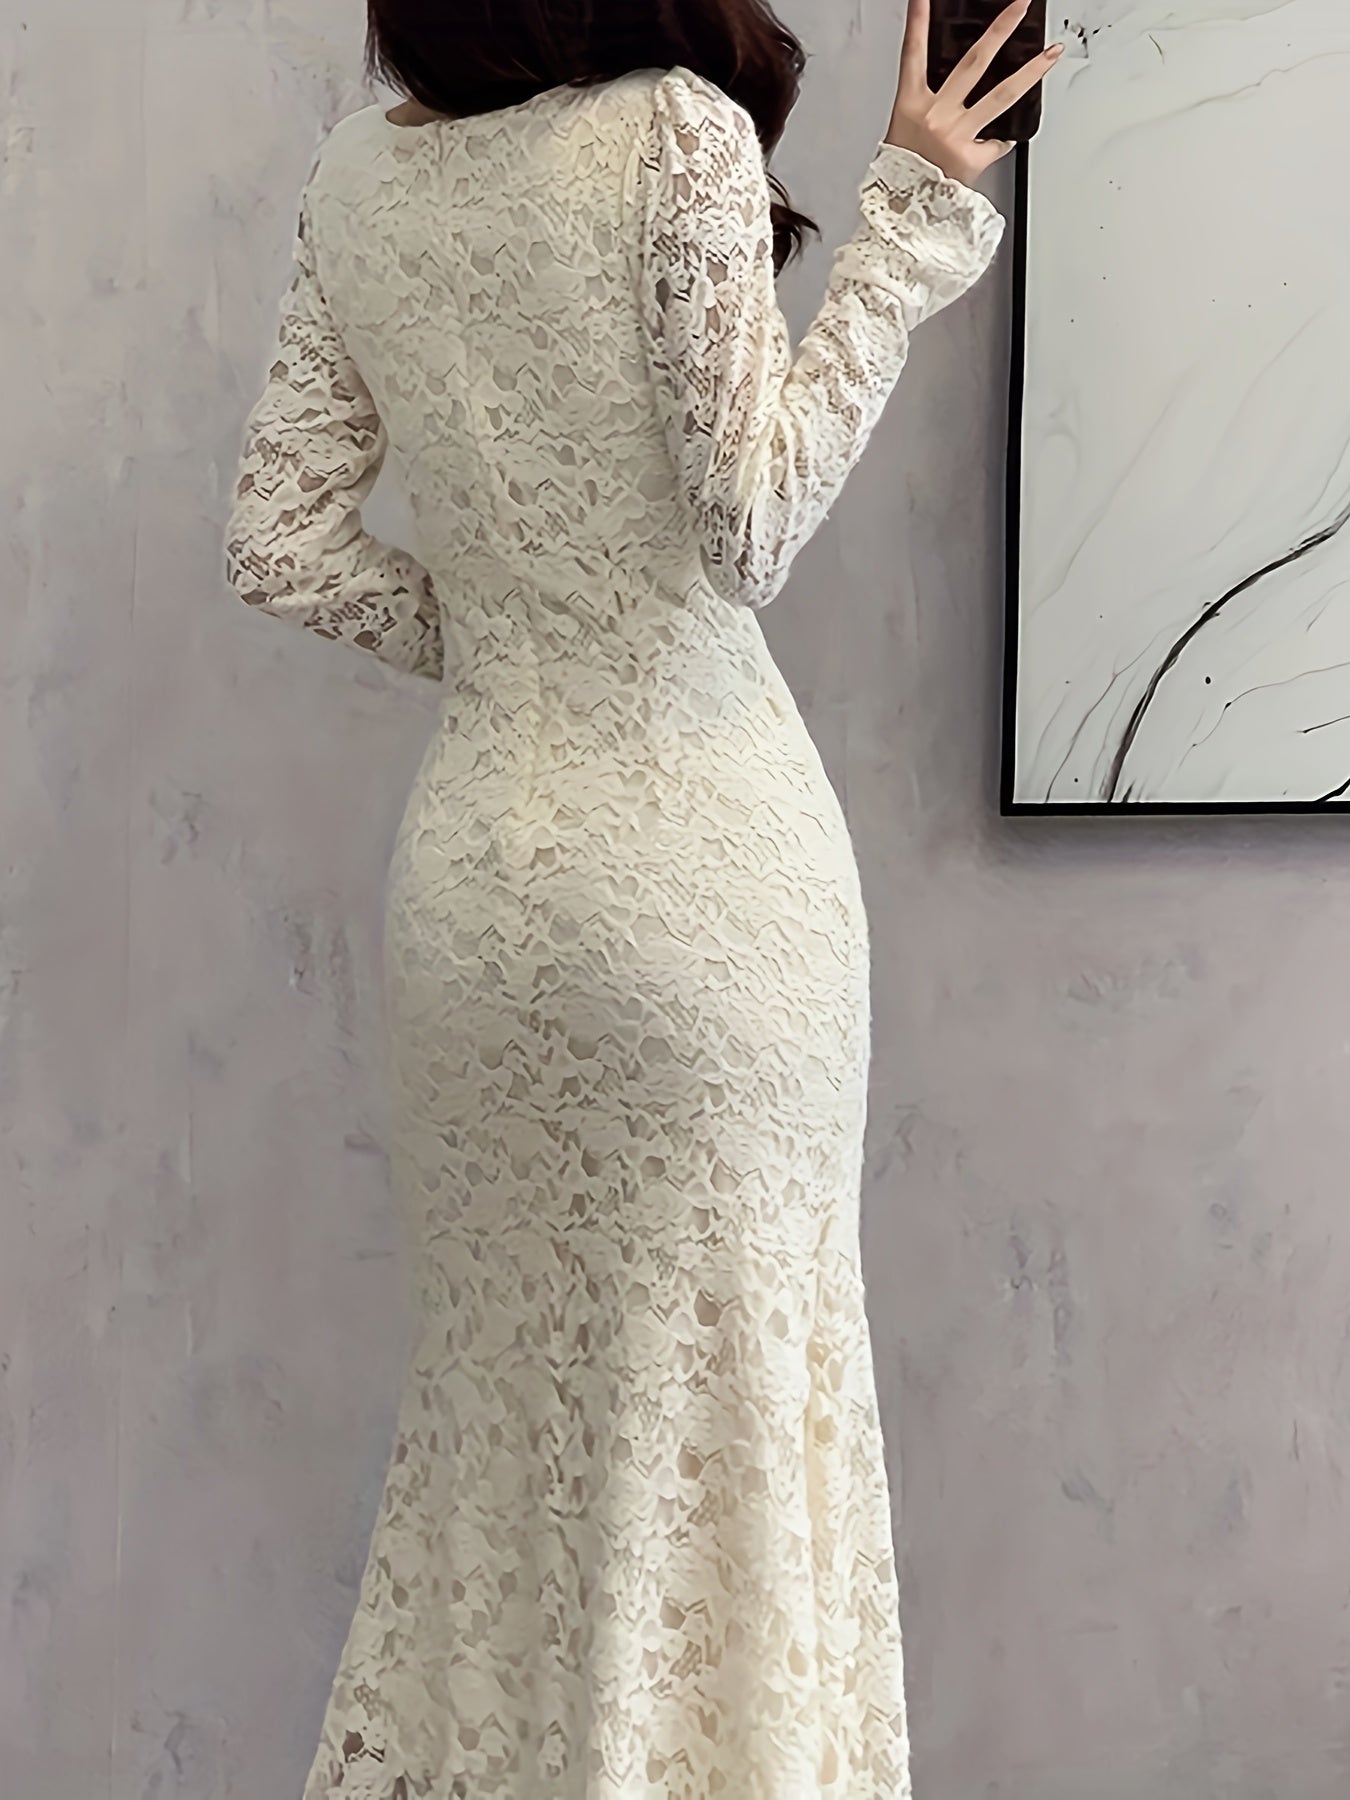 Vzyzv Square Neck Lace Trumpet Dress, Chic Long Sleeve Ruched Mid Calf Dress, Women's Clothing